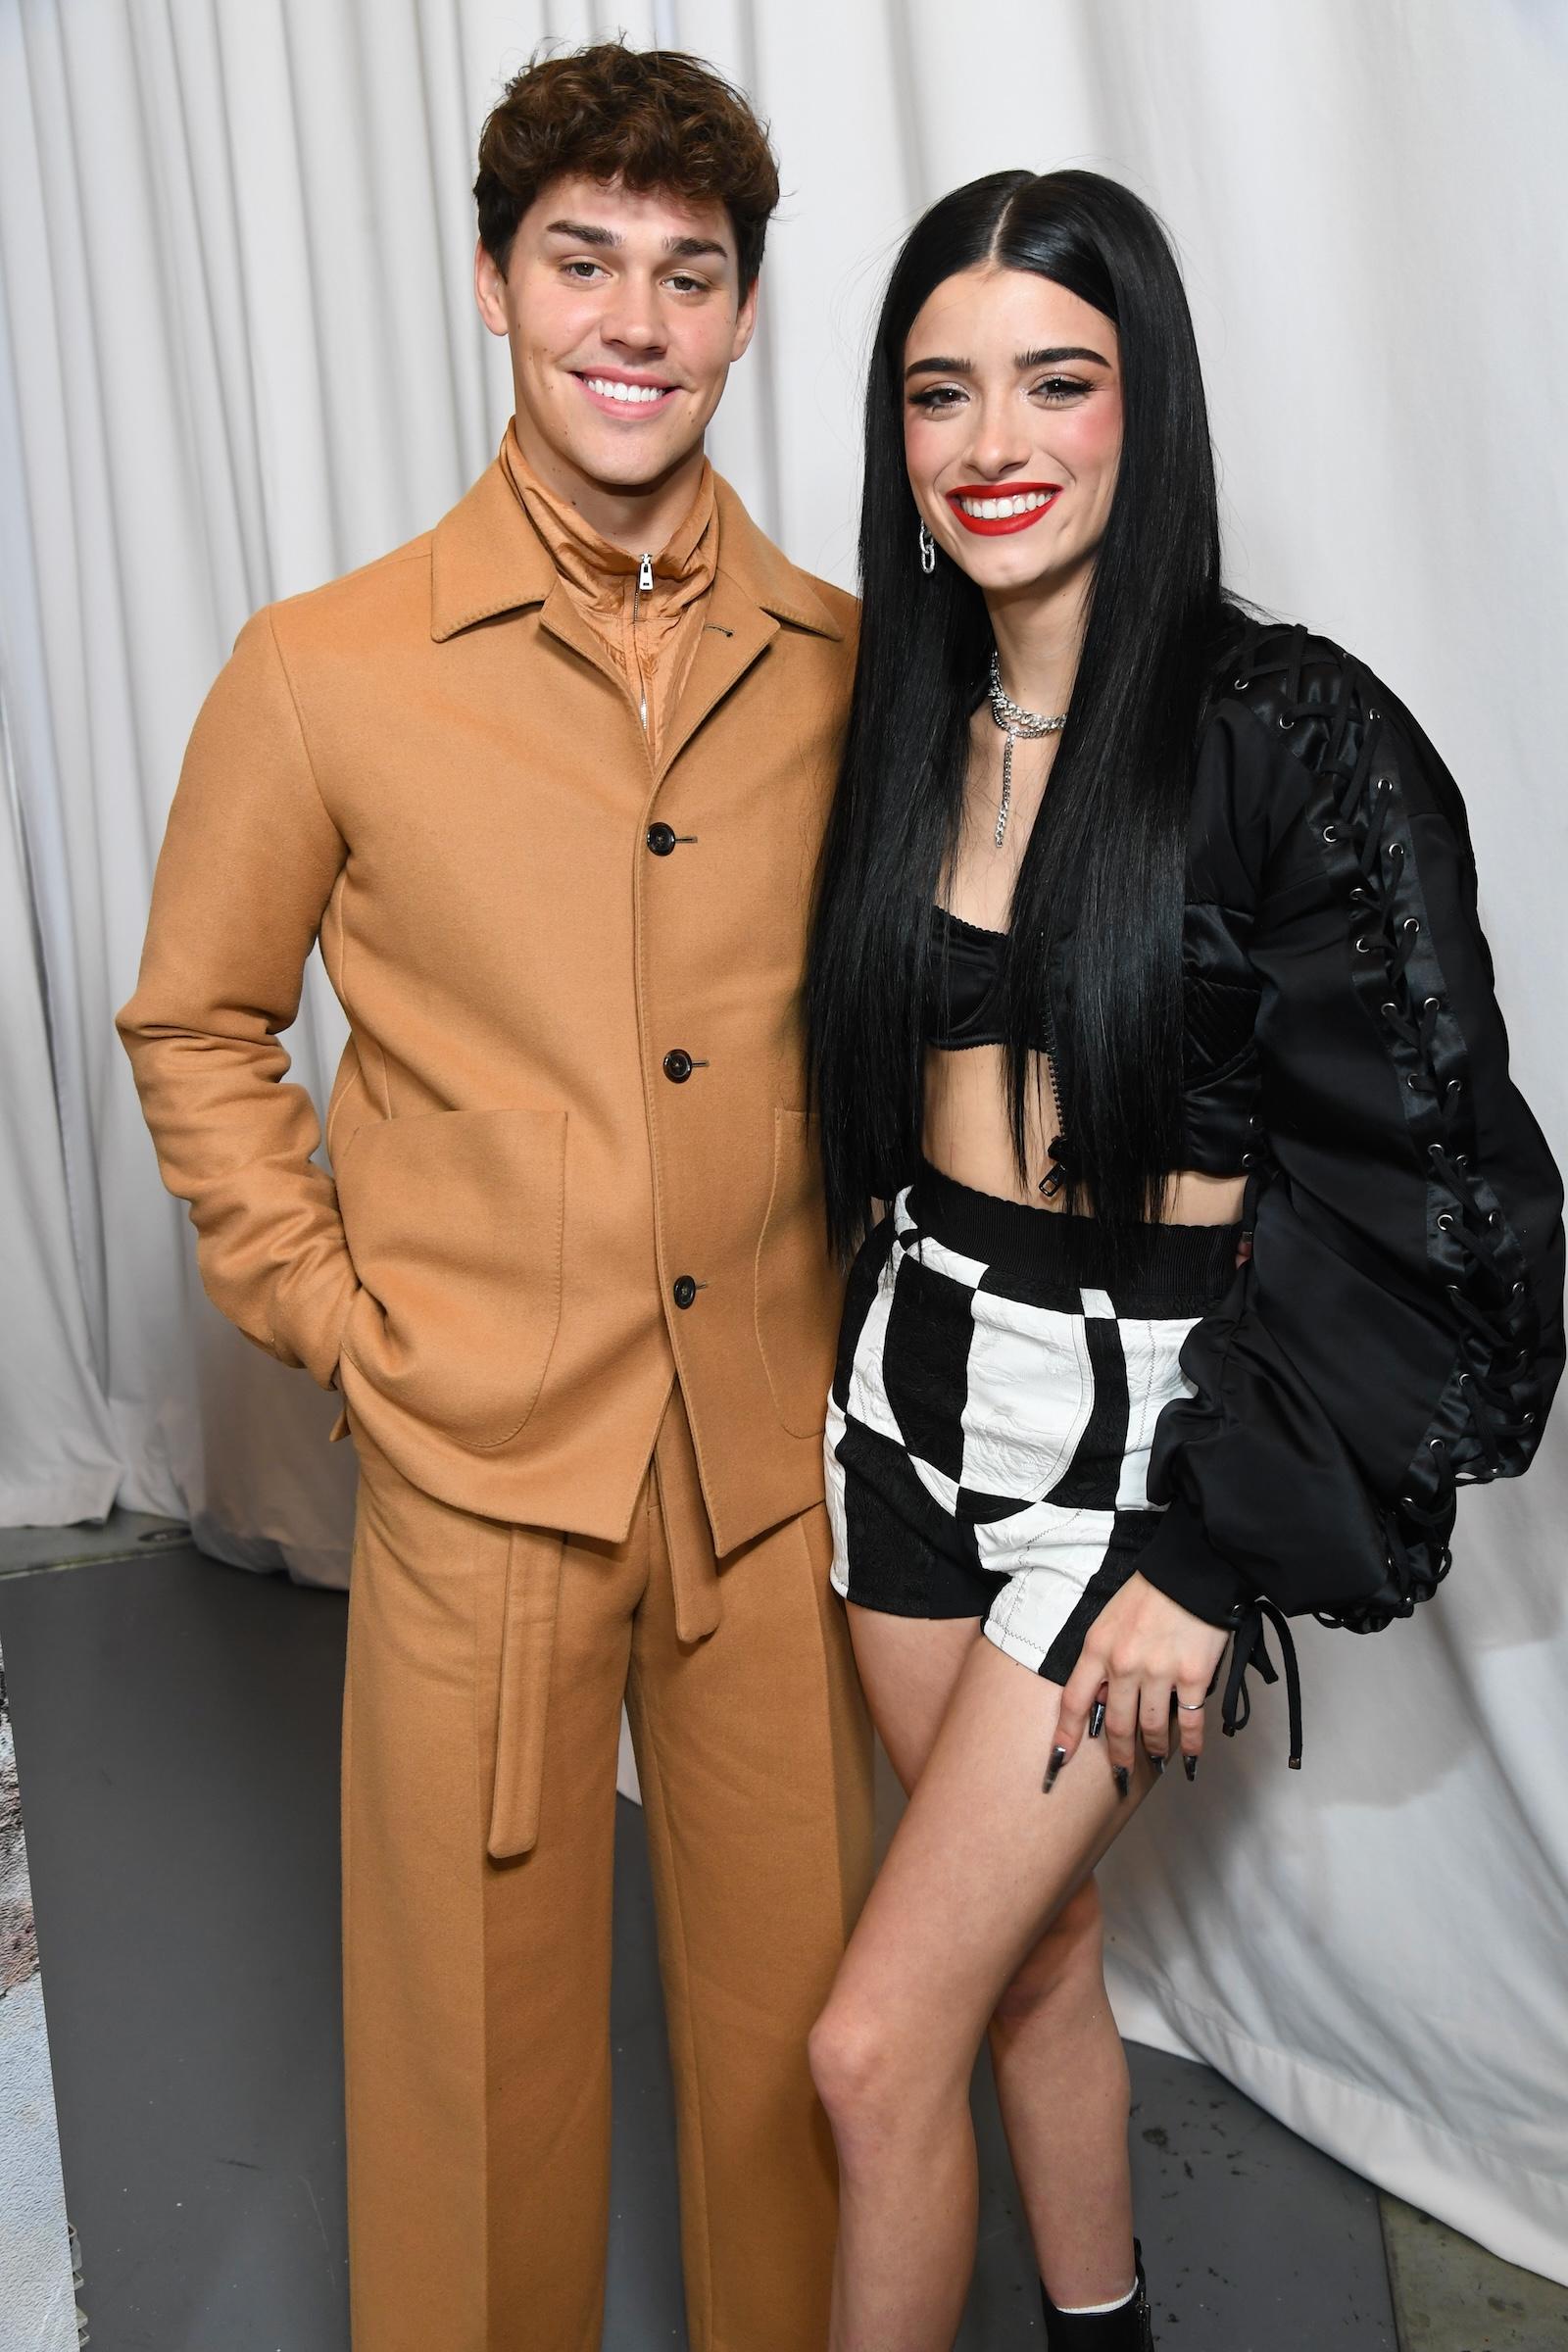 Noah Beck and Dixie D'Amelio at iHeartRadio's Z100 Jingle Ball 2021 on December 10, 2021 in New York City. 